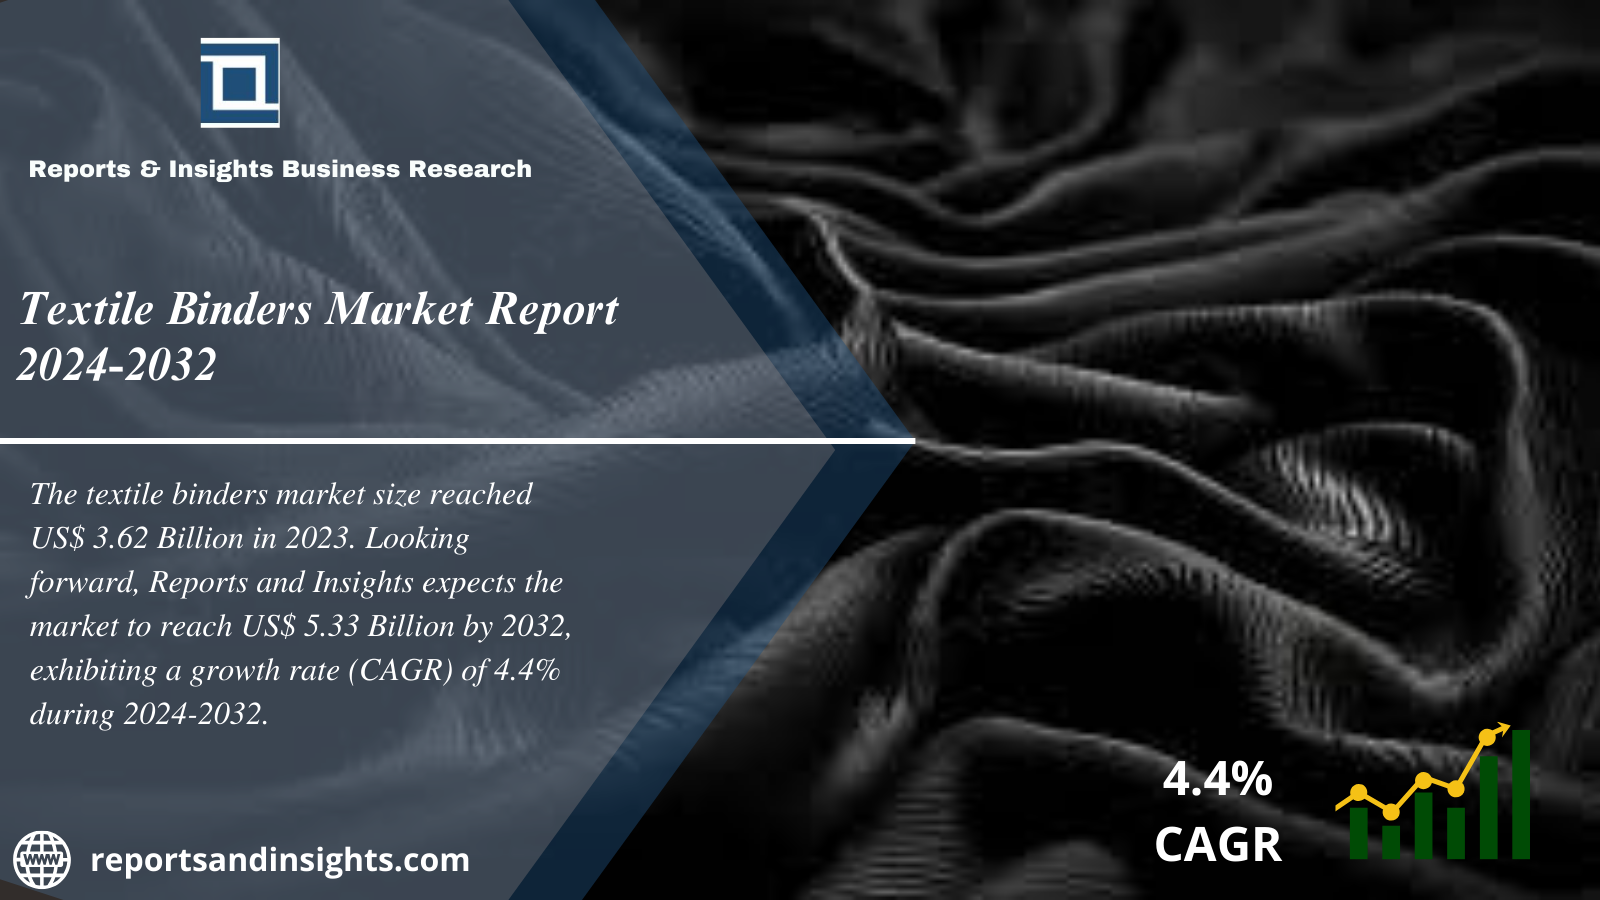 Textile Binders Market Global Size, Share, Trends, Analysis and Research Report 2024 to 2032